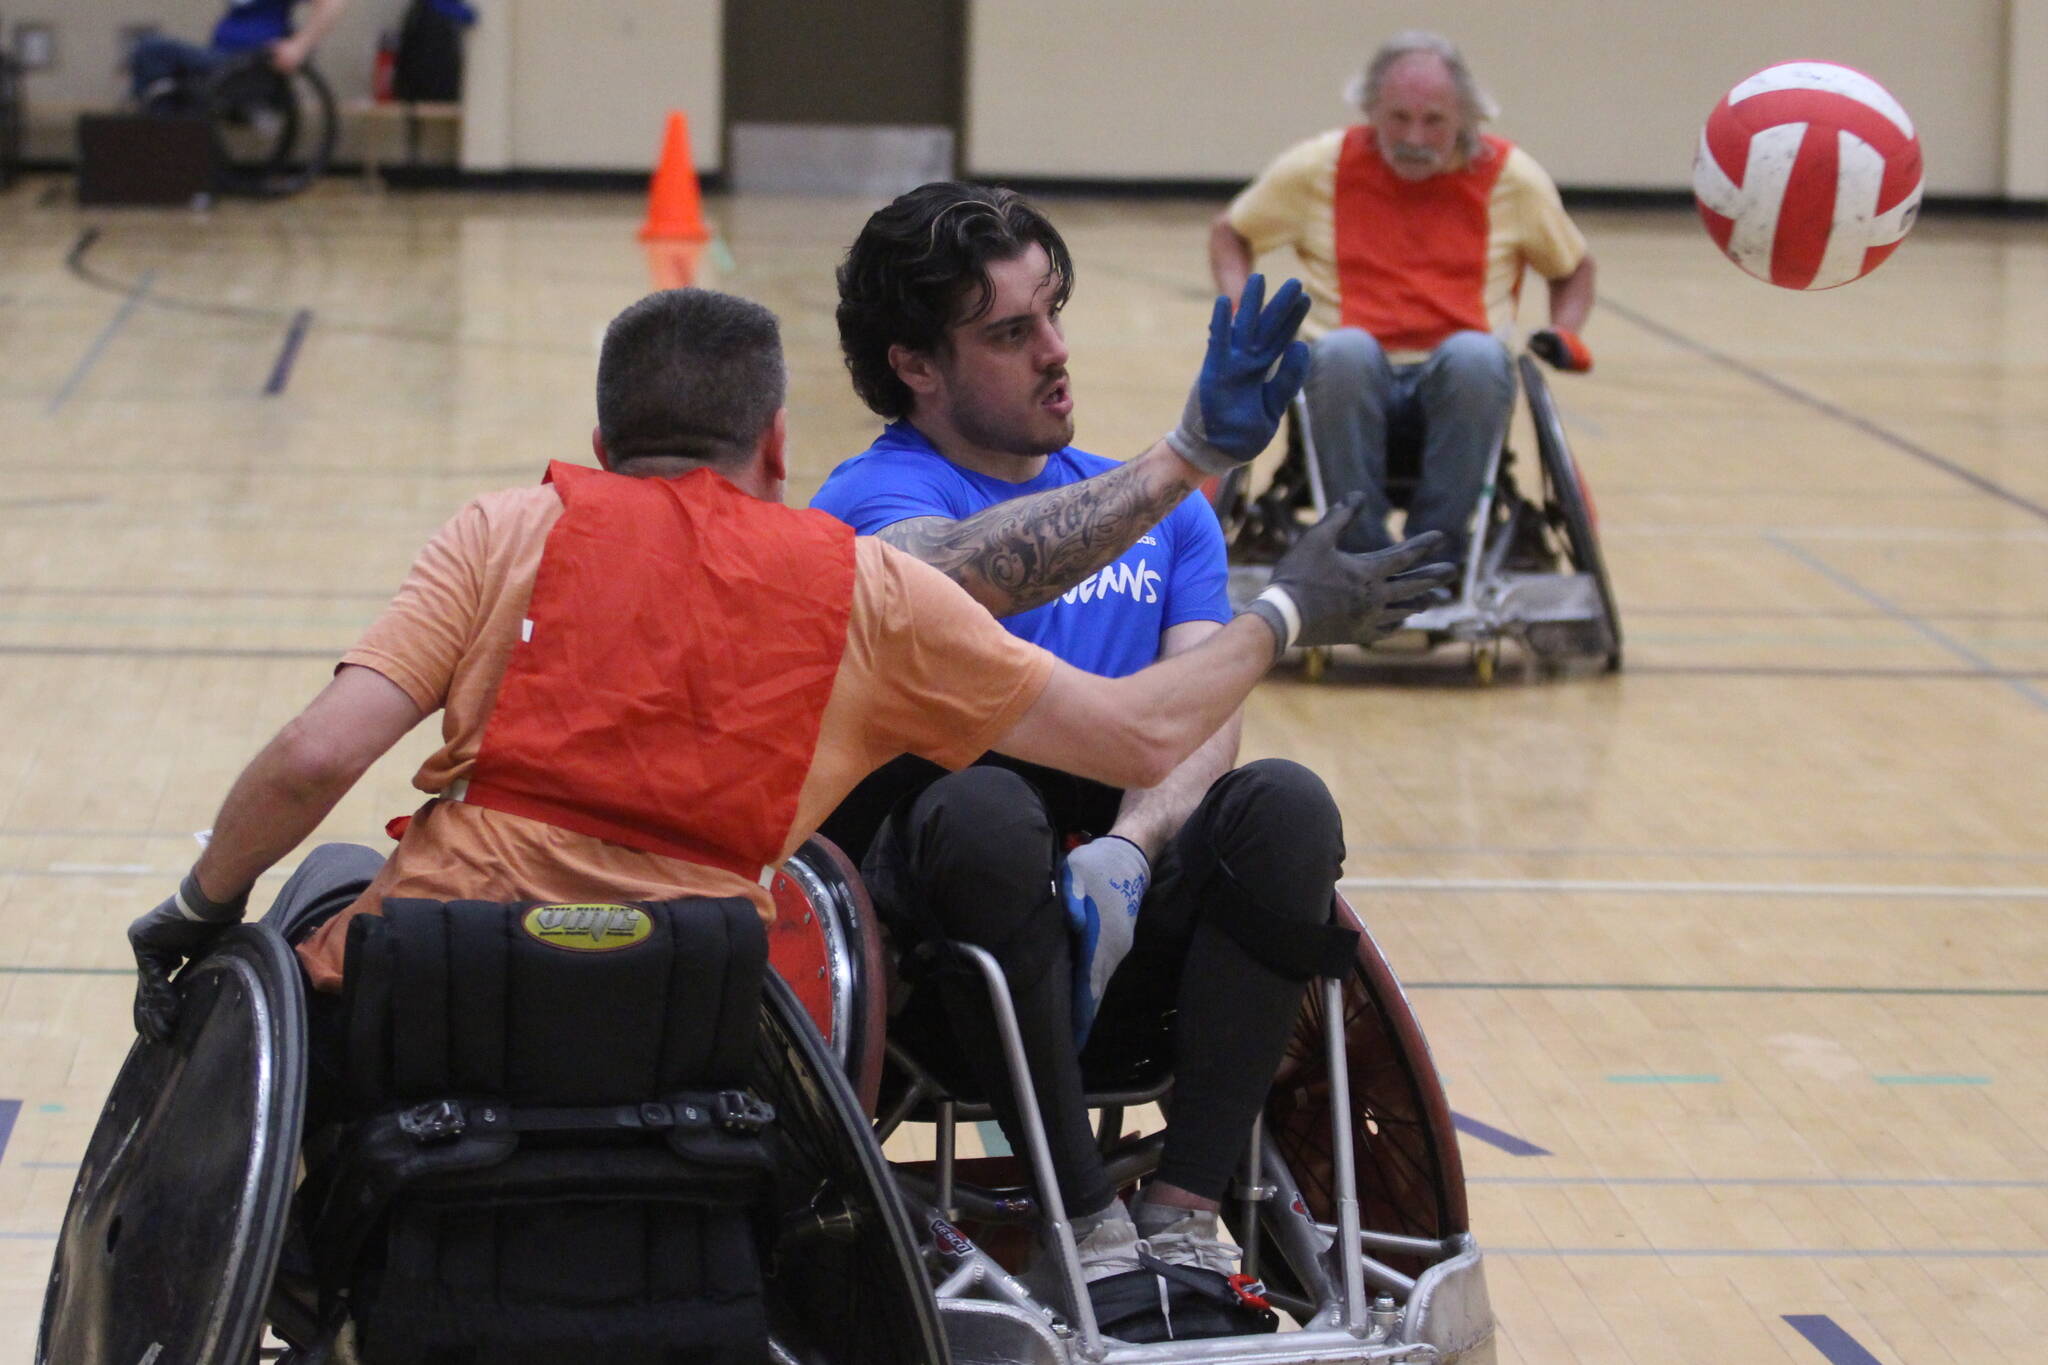 Airdrie’s Ryan Straschnitzki makes a pass during the wheelchair rugby jamboree in Penhold, Alberta, in June, hosted by the Red Deer Reapers. (Photo by Ian Gustafson/ Advocate staff)